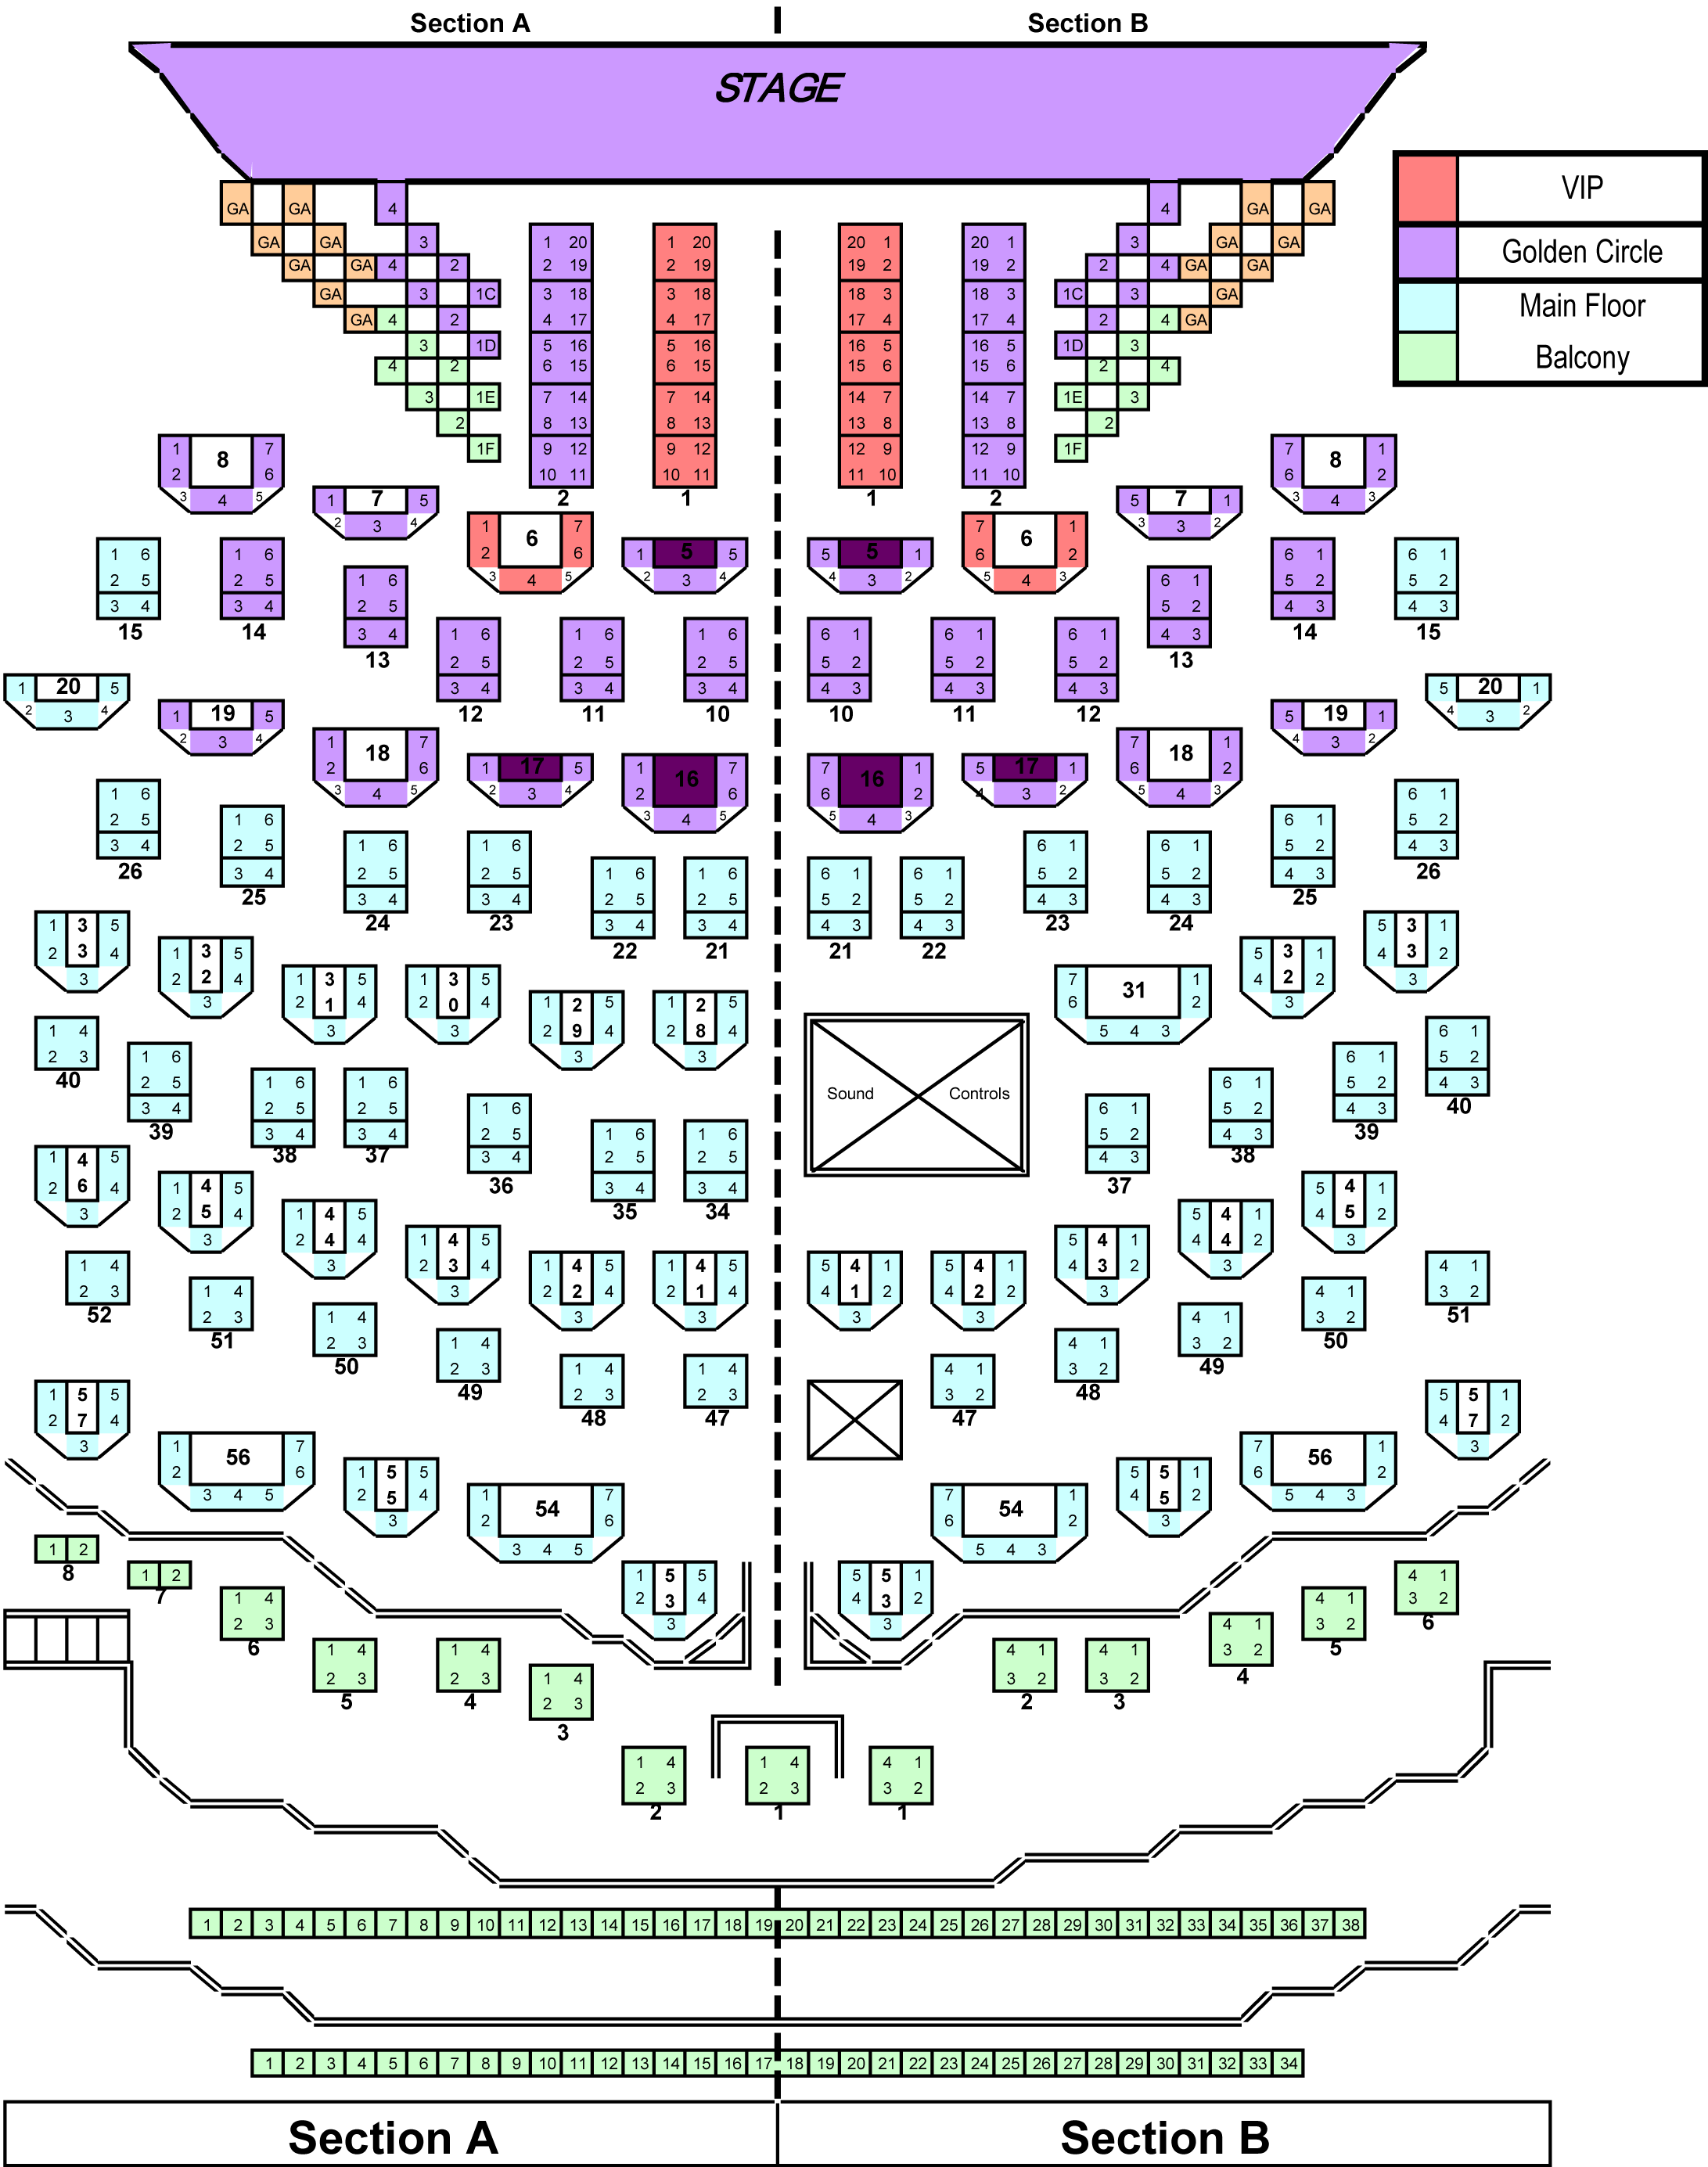 Donny And Theater Seating Chart